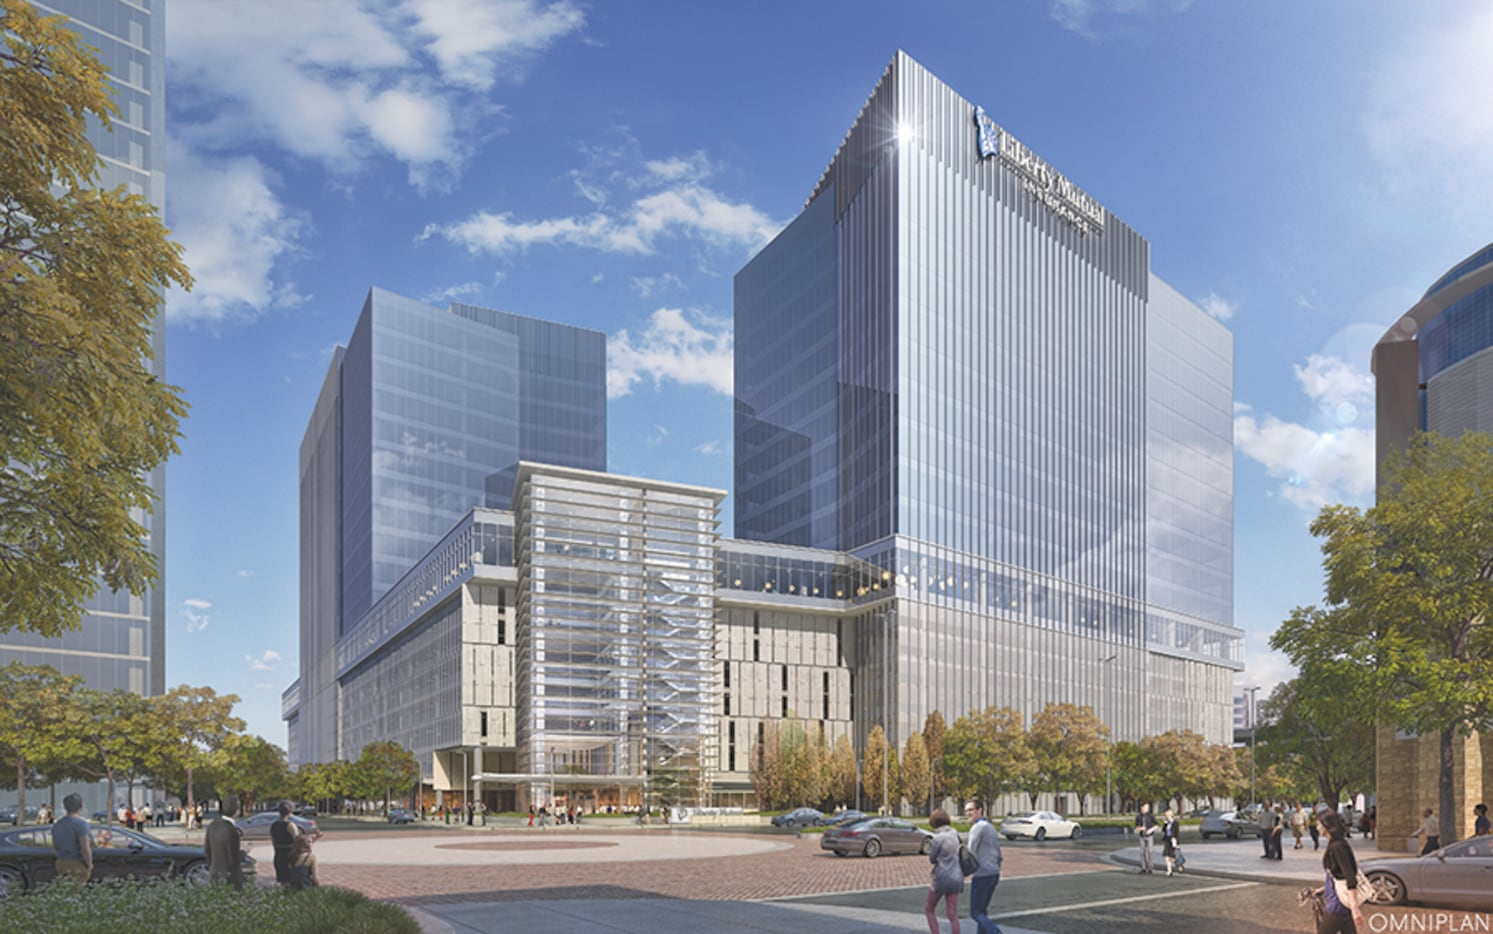 Liberty Mutual Insurance: Plano regional ofﬁce, a two-building, 1.2 million-square-foot...